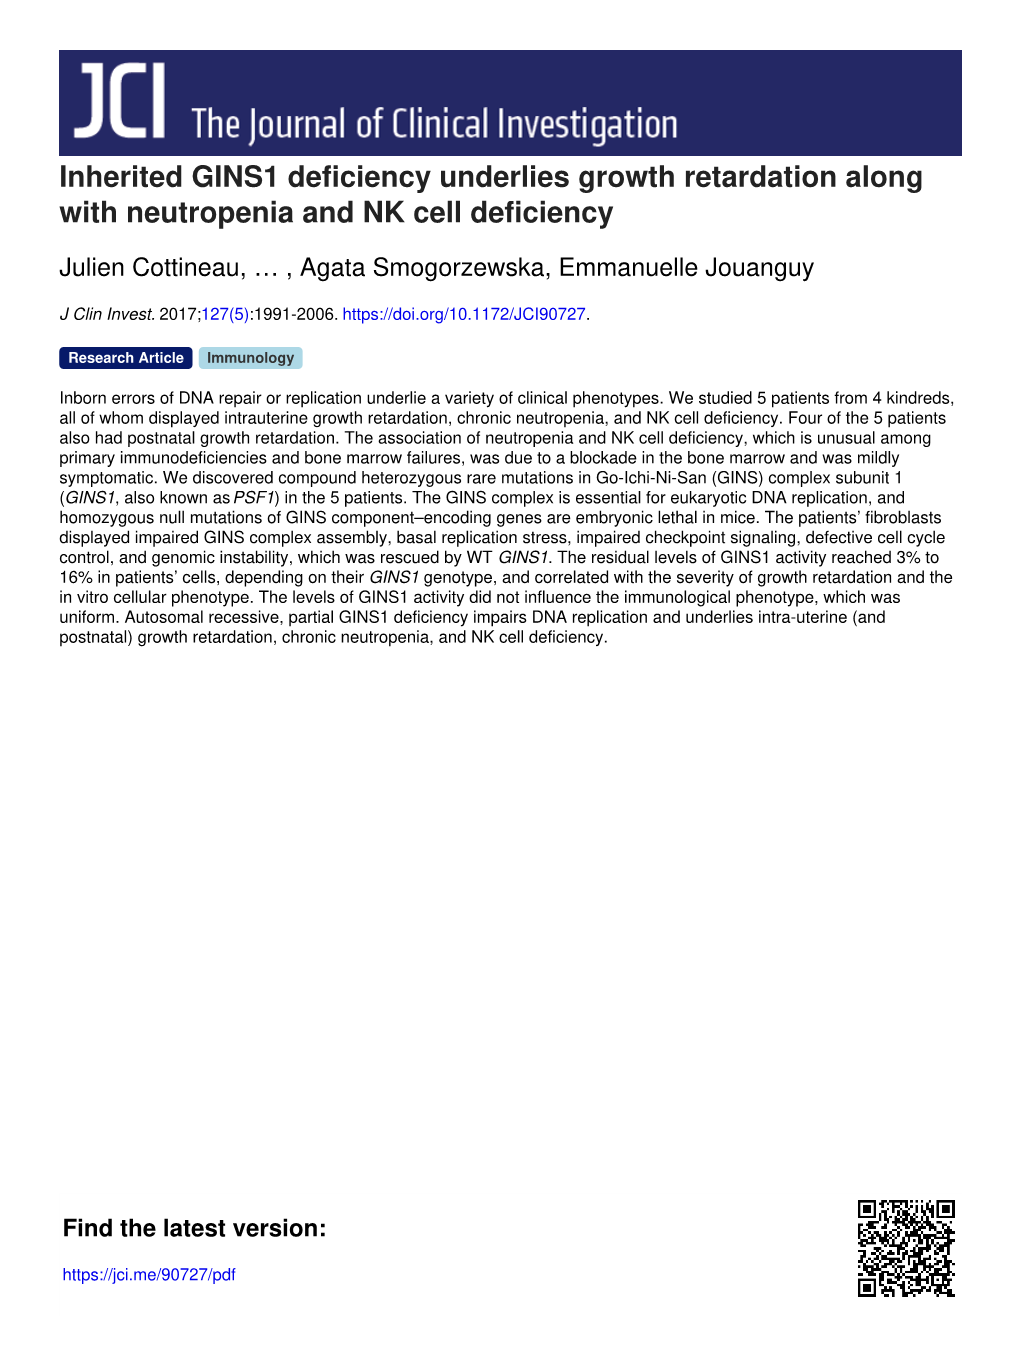 Inherited GINS1 Deficiency Underlies Growth Retardation Along with Neutropenia and NK Cell Deficiency